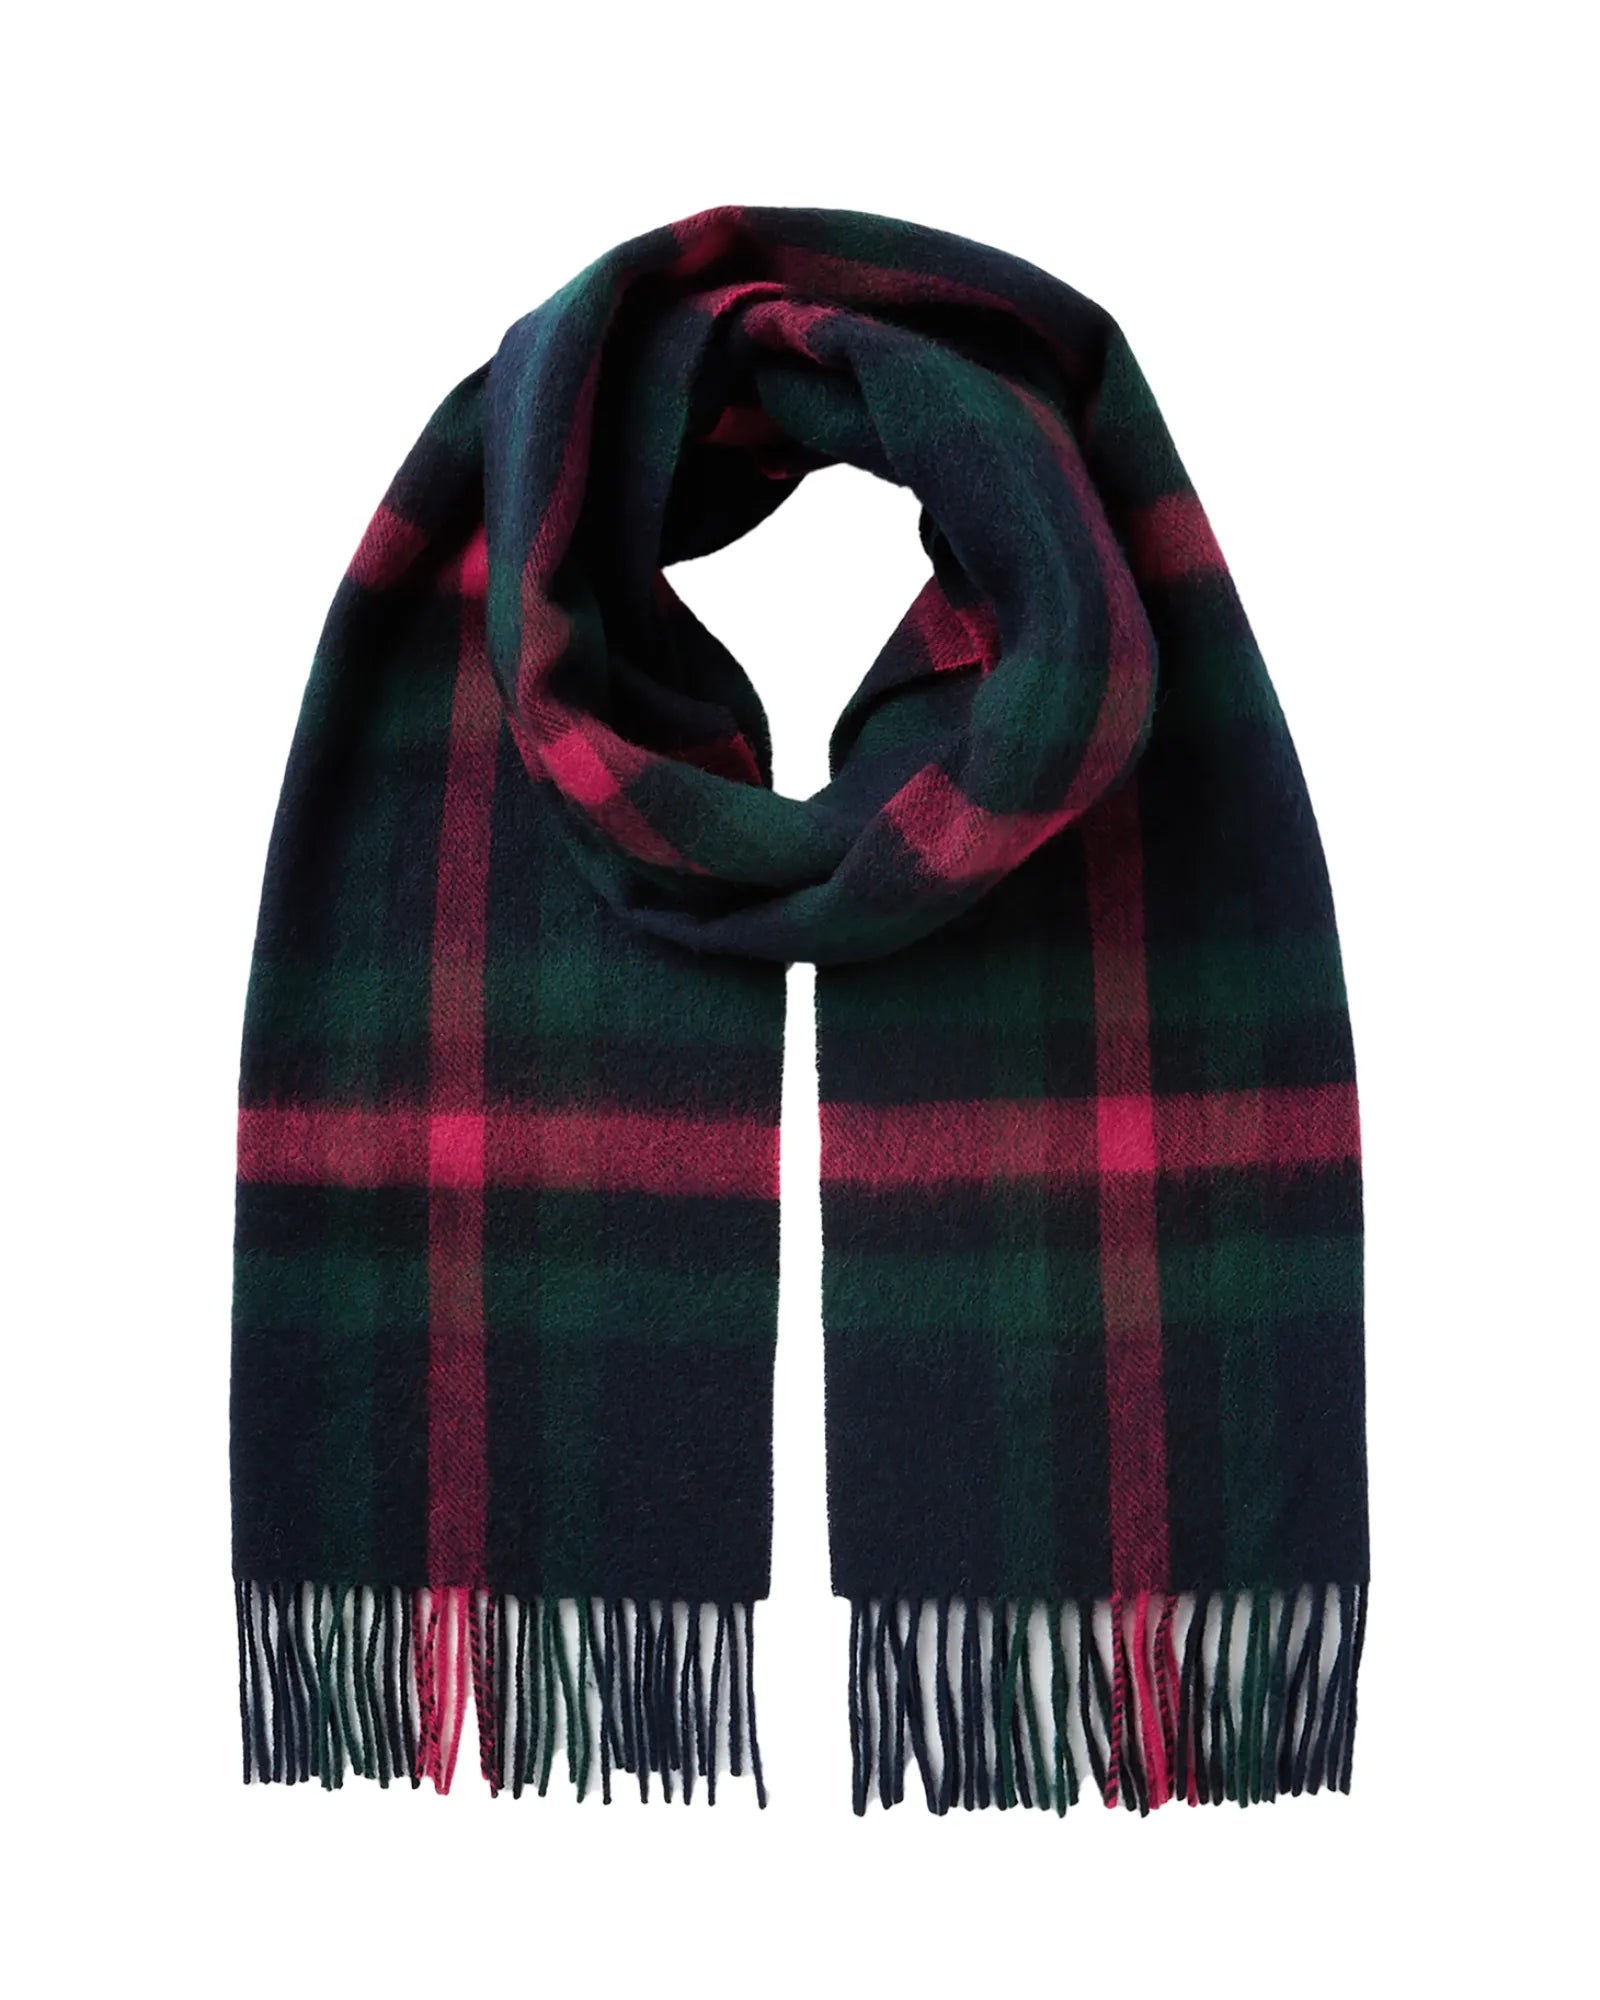 Langtree Scarf - Navy Pink Check